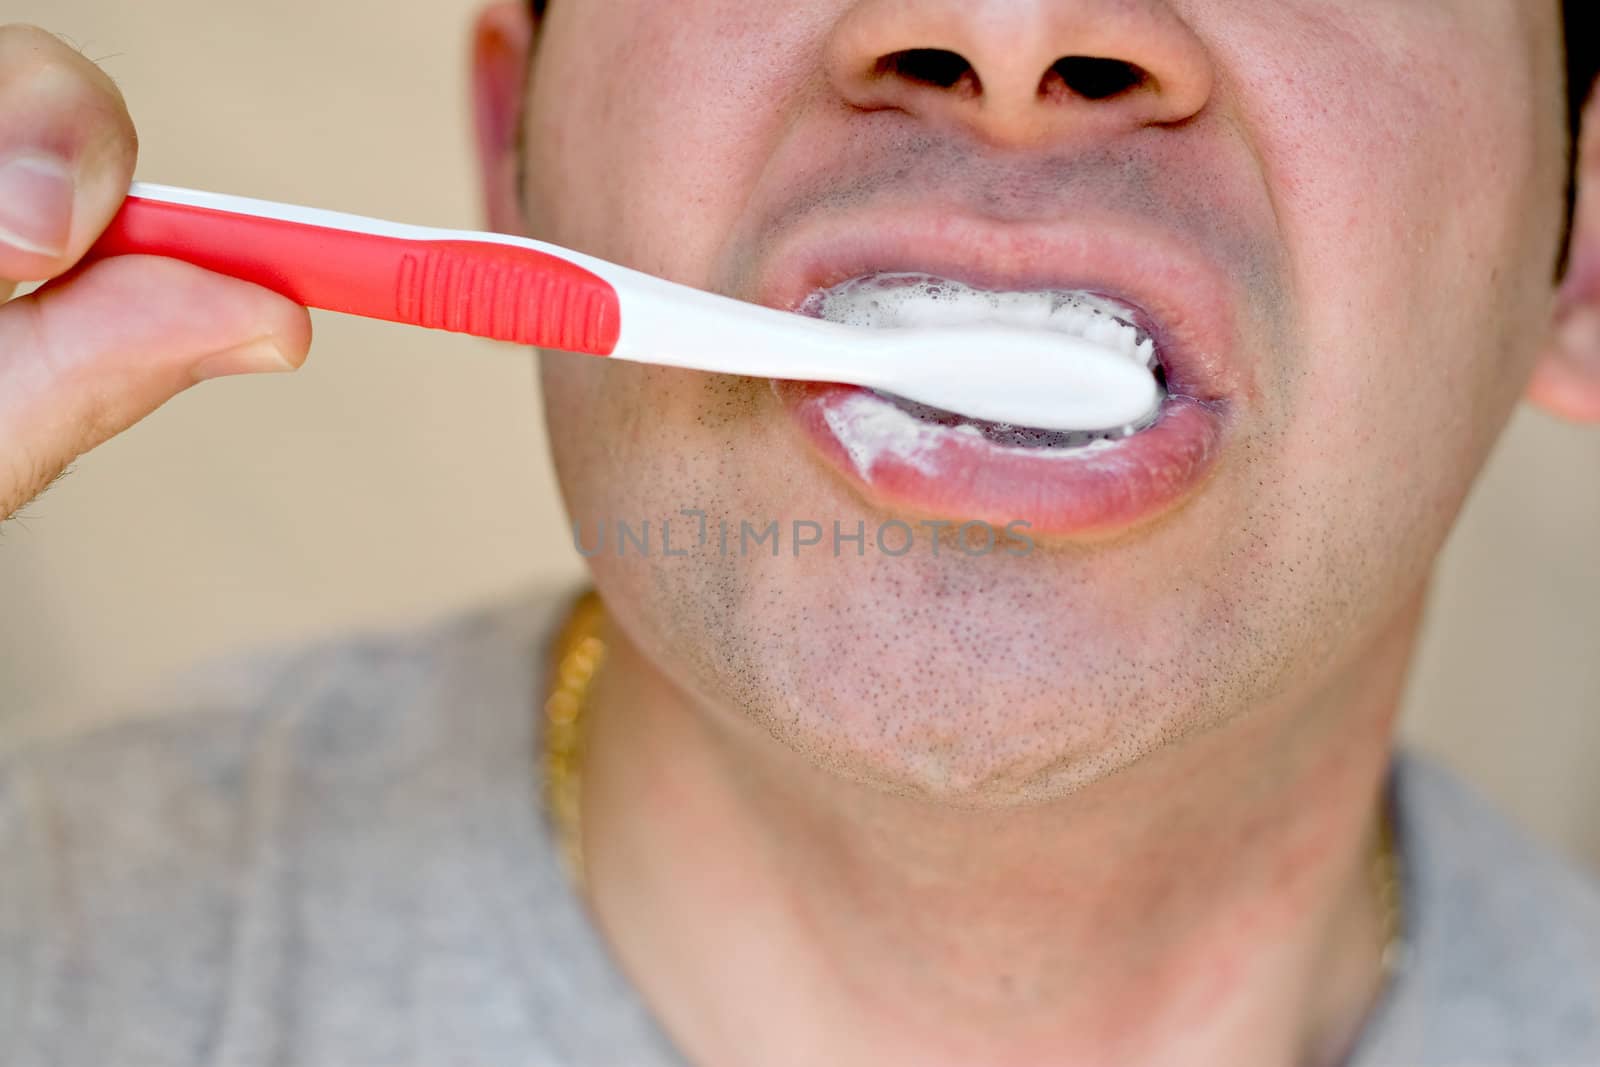 A closeup of a young man while he is brushing his teeth.